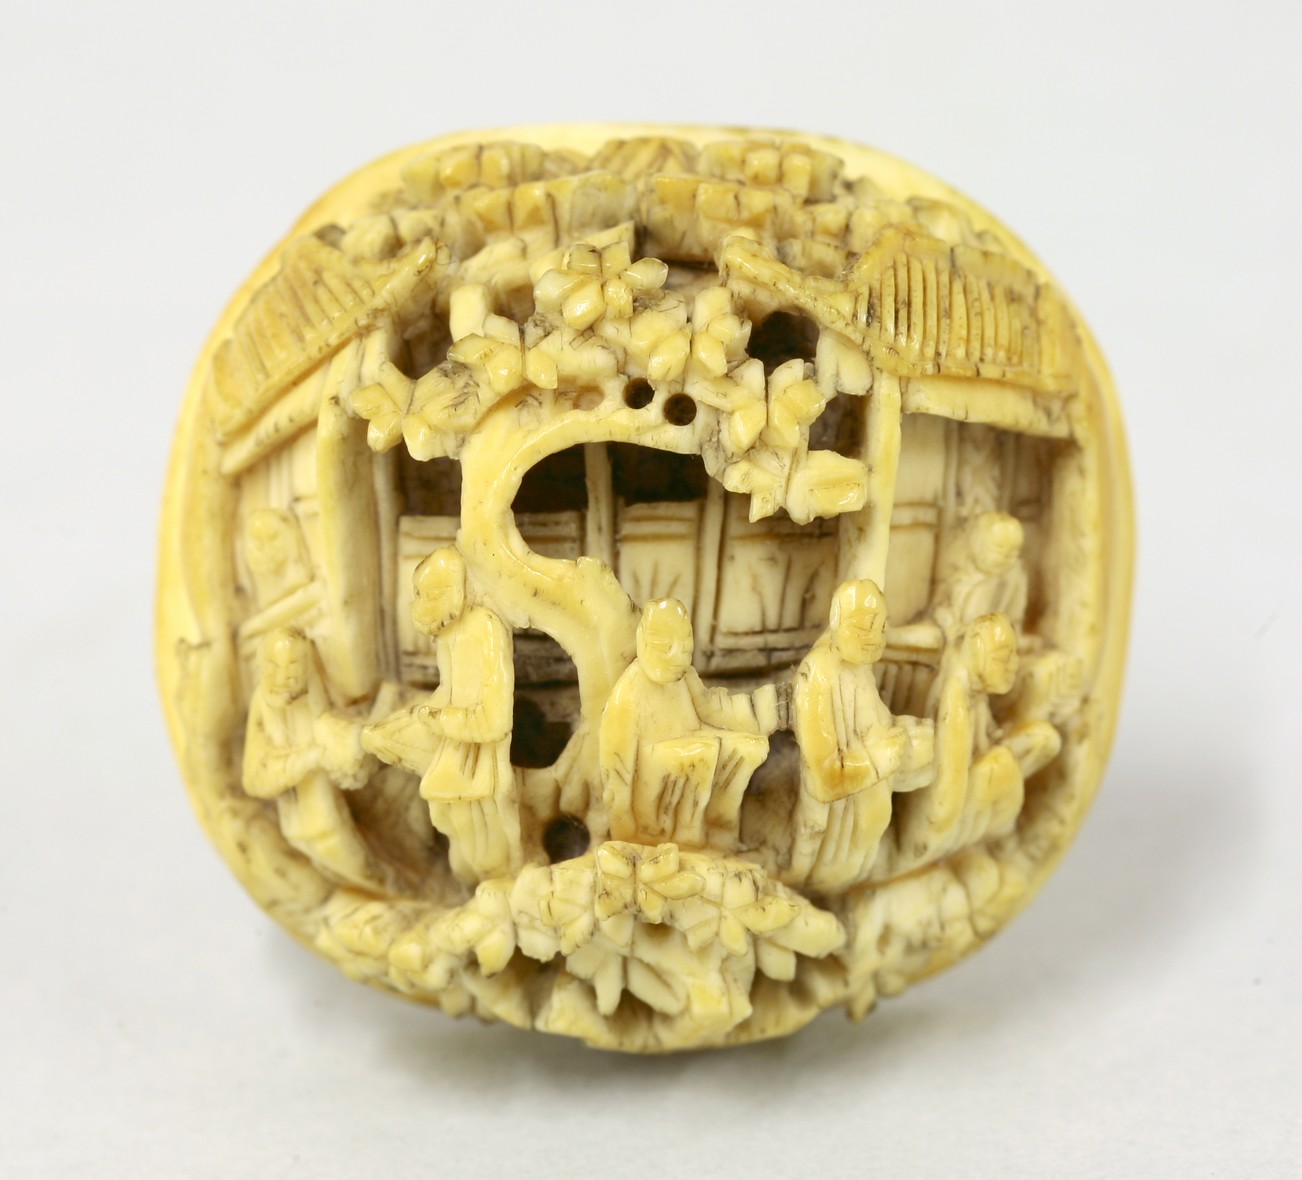 A Canton ivory Brooch Cabochon,
mid 19th century, carved and undercut with figures between trees and